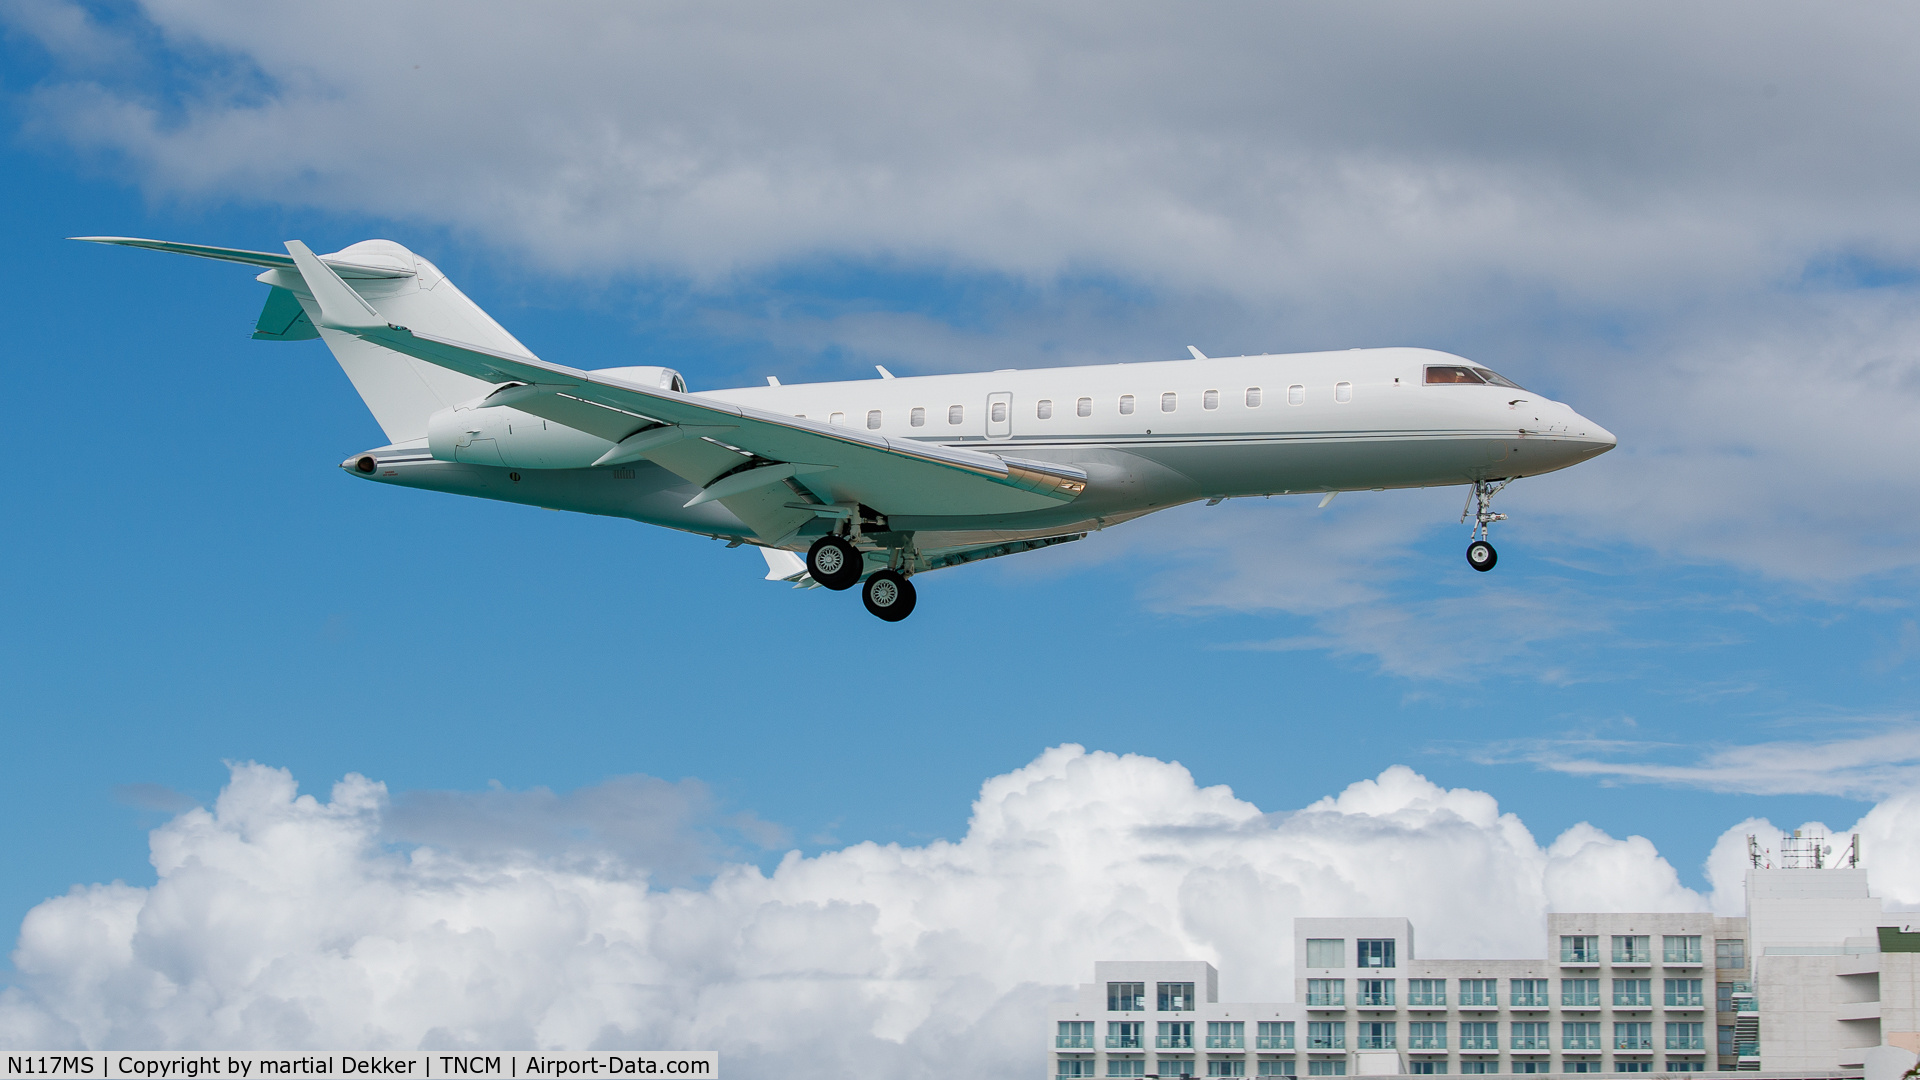 Bombardier Global 5000, Certified pre-owned, Aircraft for sale, 1920x1080 Full HD Desktop